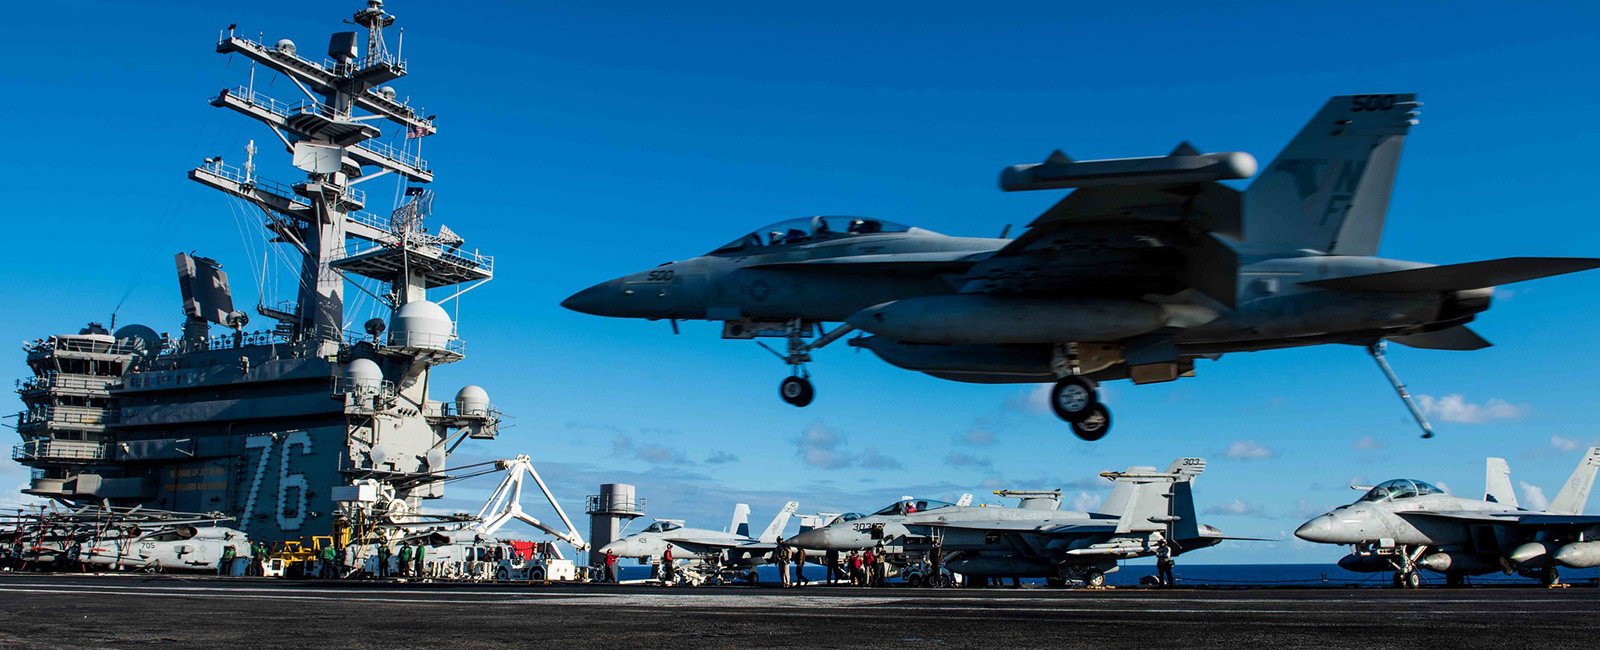 An EA-18G Growler assigned to Electronic Attack Squadron (VFA) 141 lands on the flight deck of the Navy's forward-deployed aircraft carrier, USS Ronald Reagan (CVN 76). Ronald Reagan, the flagship of Carrier Strike Group 5, provides a combat-ready force that protects and defends the collective maritime interests of its allies and partners in the Indo-Pacific region.